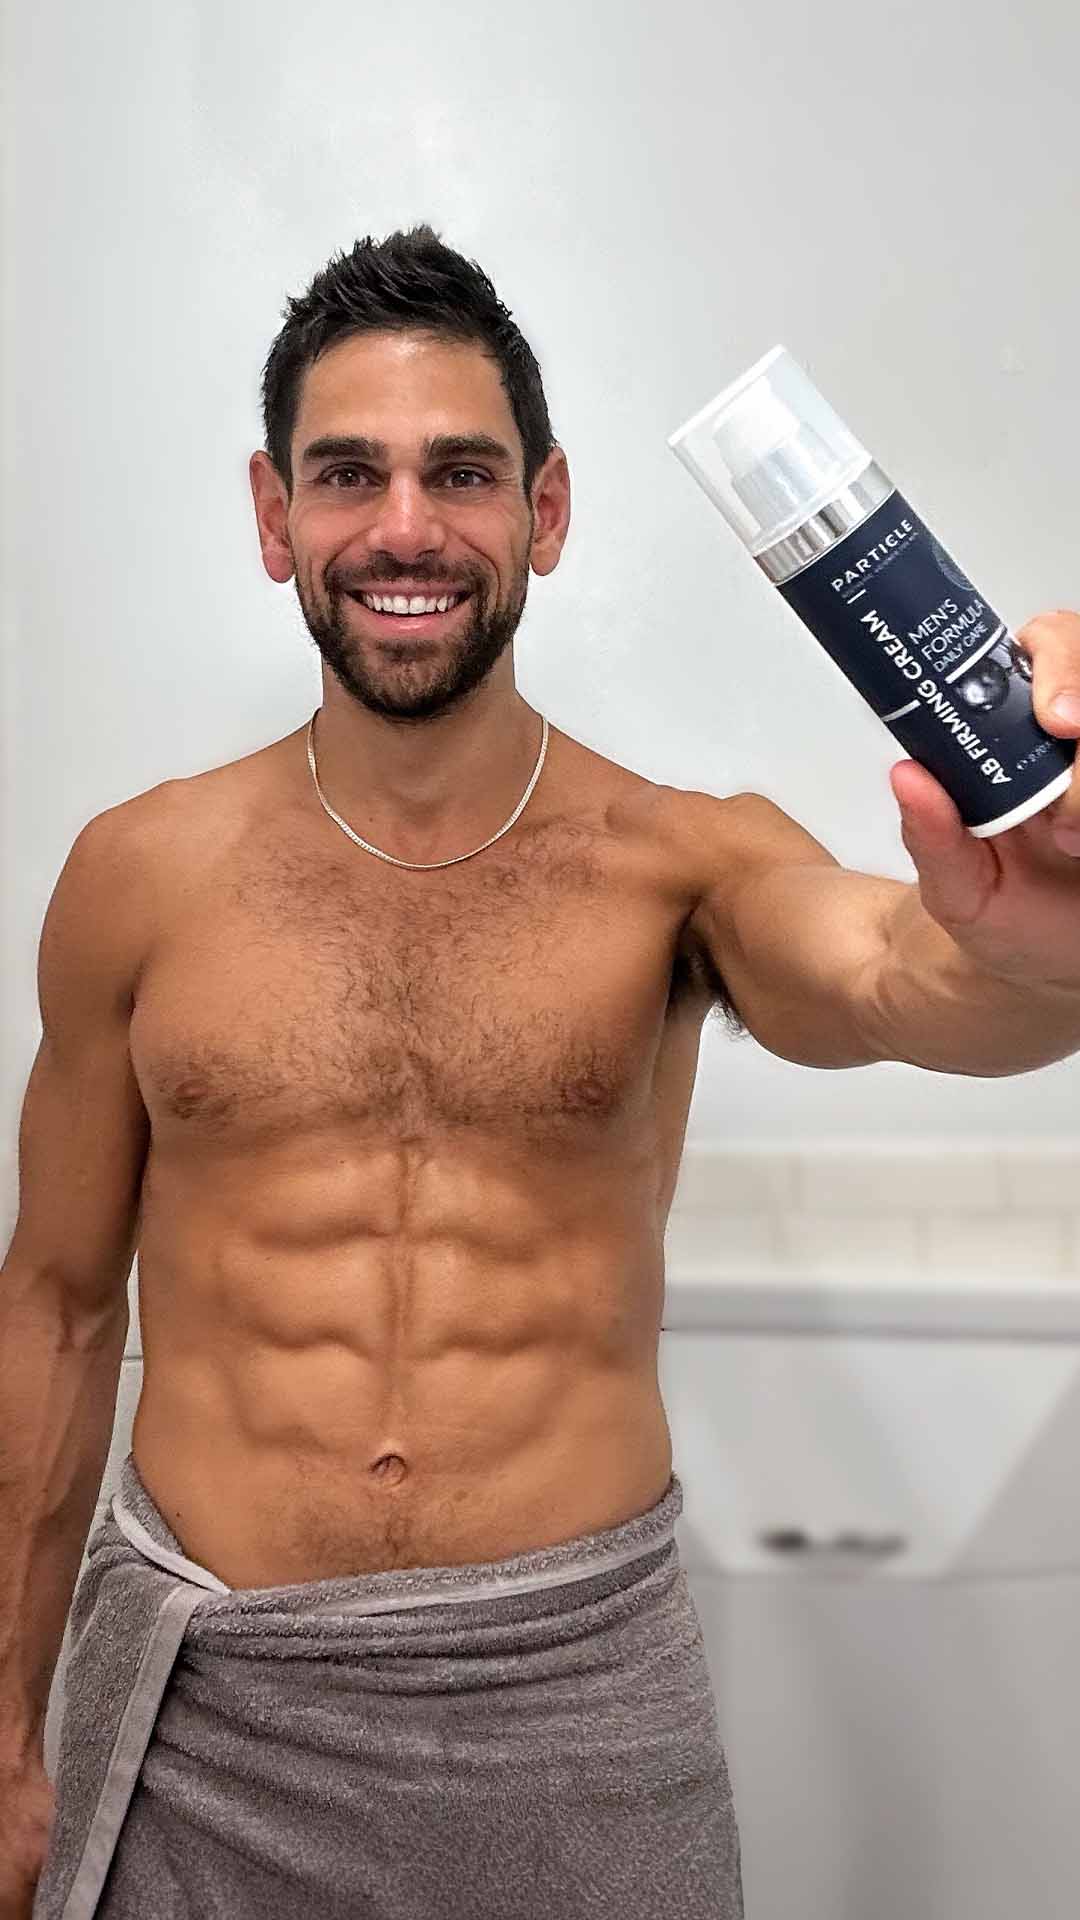 Man with defined abdominal muscles, smiling, holding Particle AB Firming Cream bottle.